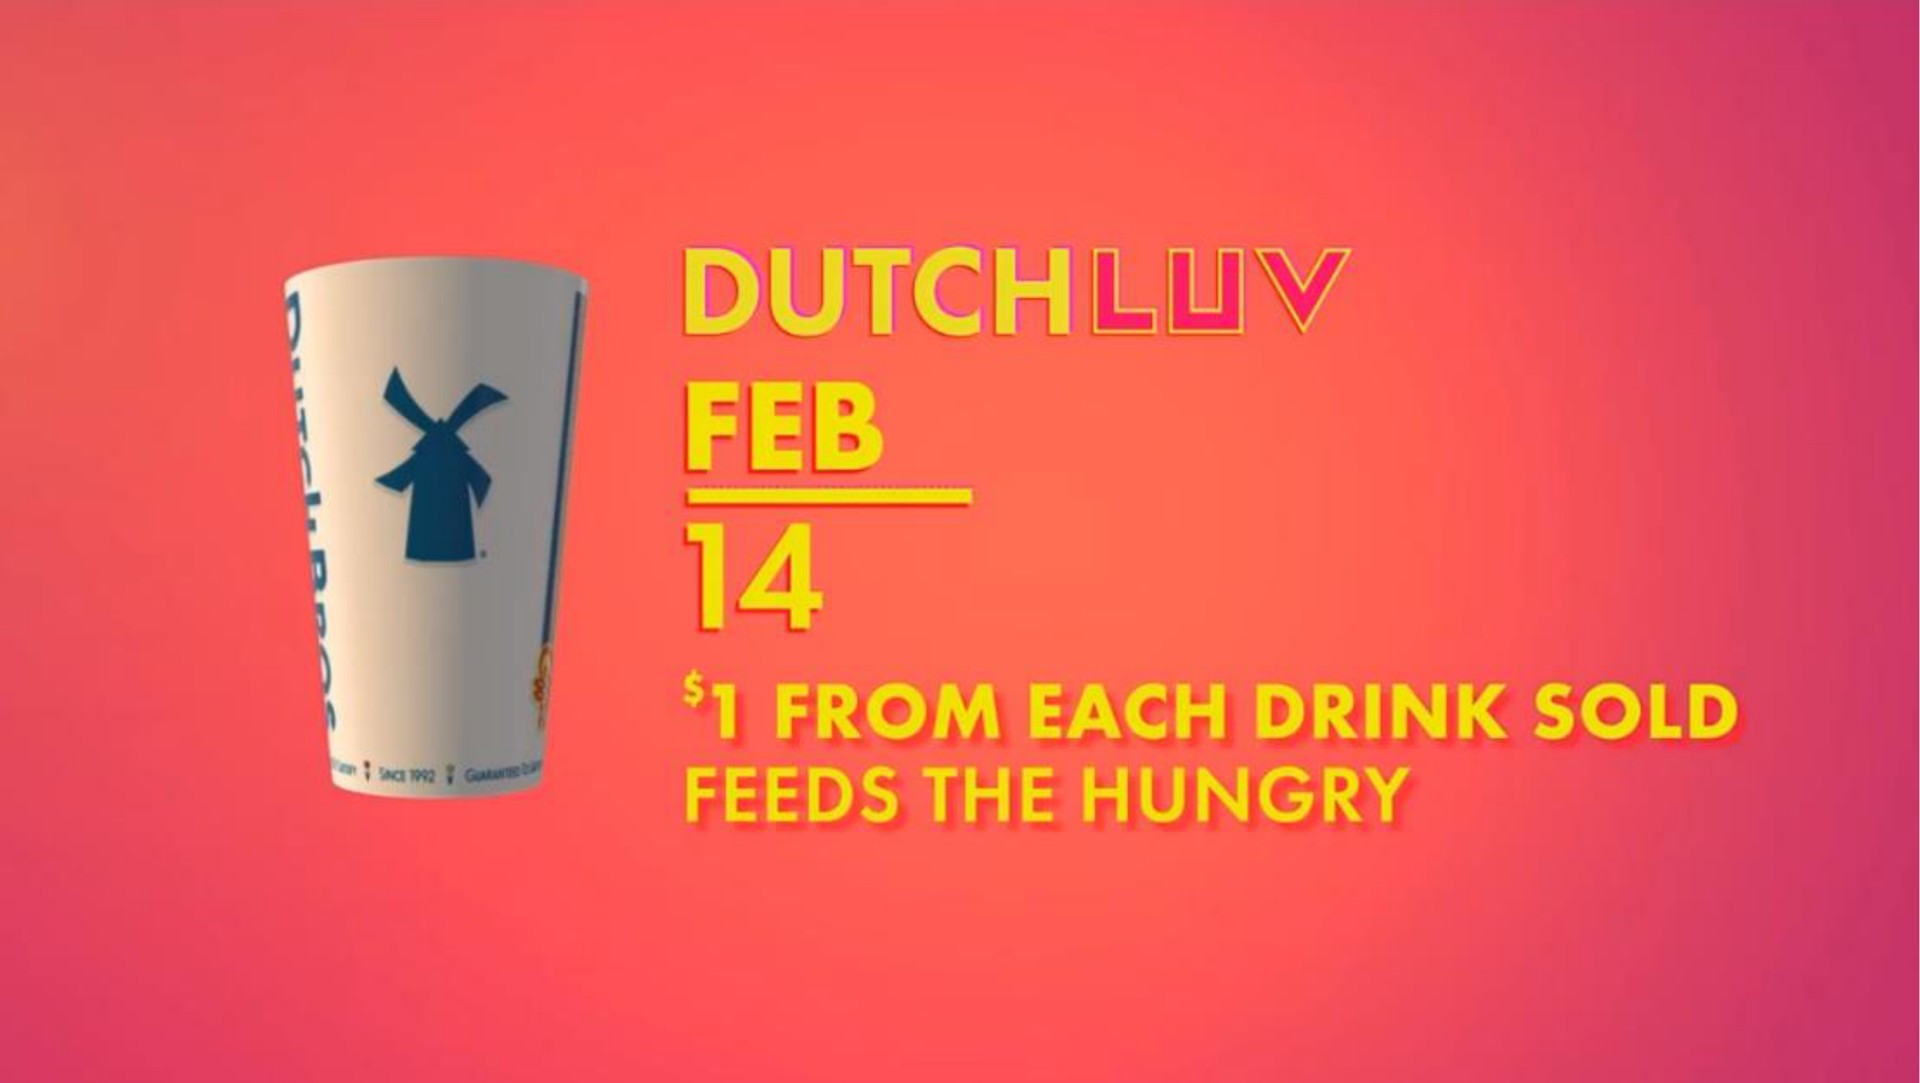 dutch from each drink sold feeds the hungry | Dutch Bros